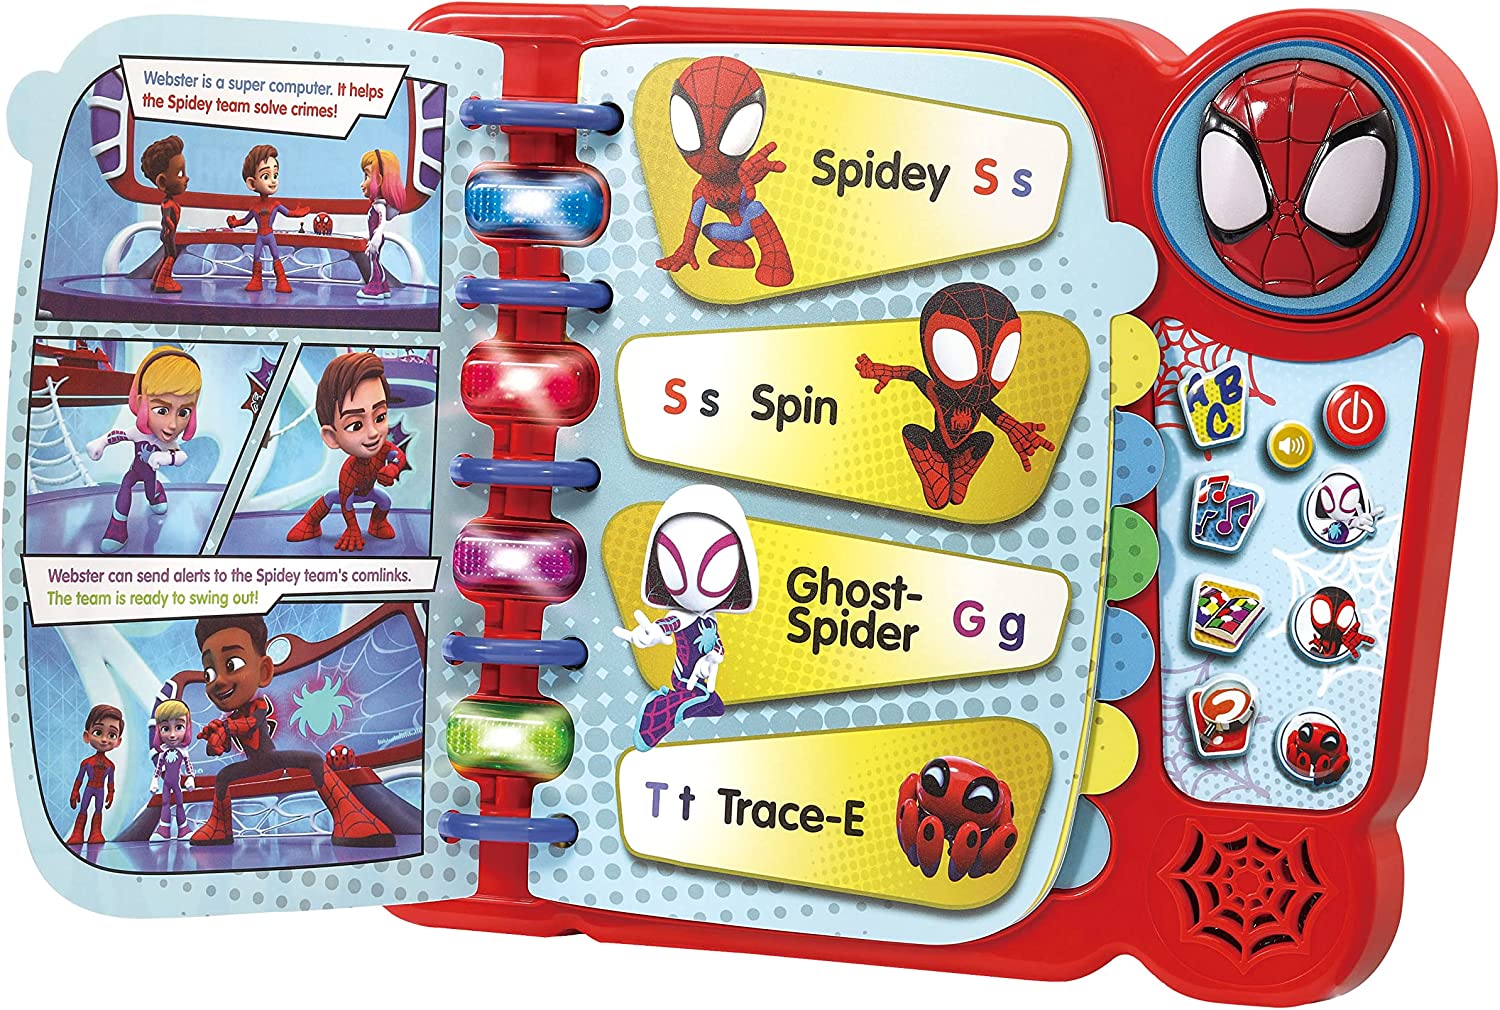 VTech Spidey Learning Book